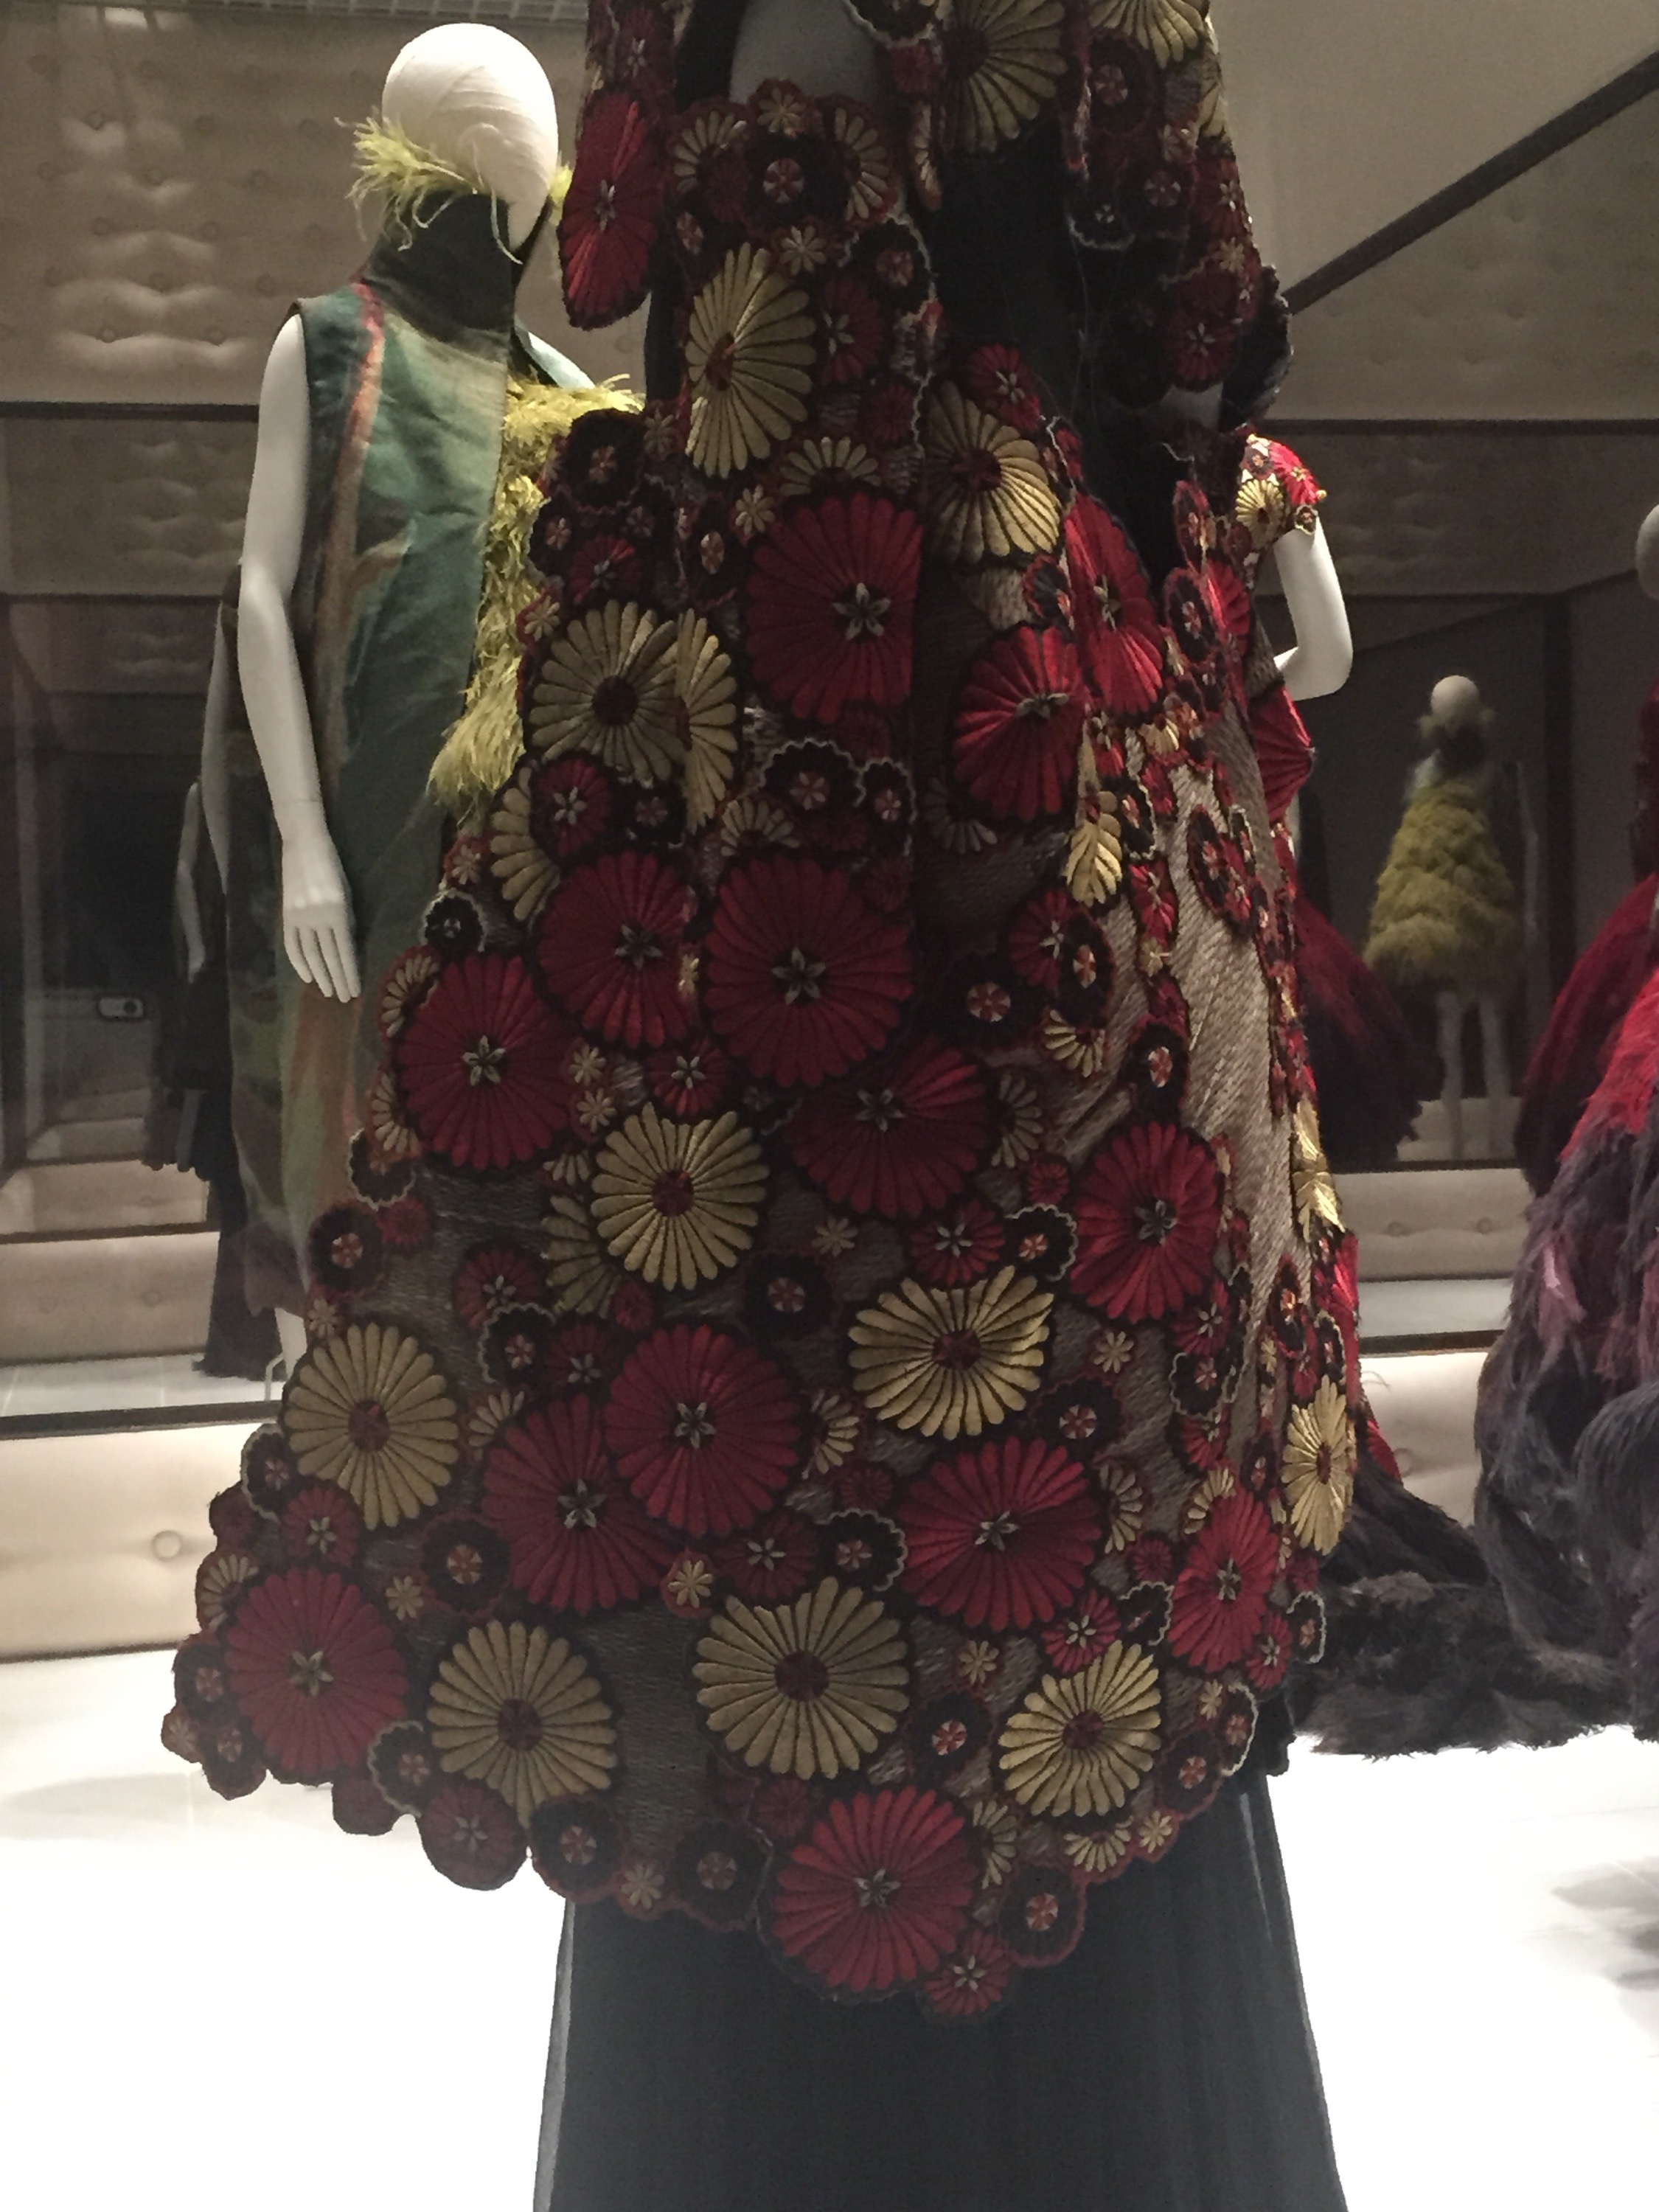 The Alexander McQueen show Savage Beauty at the V&A is a triumph. It ...